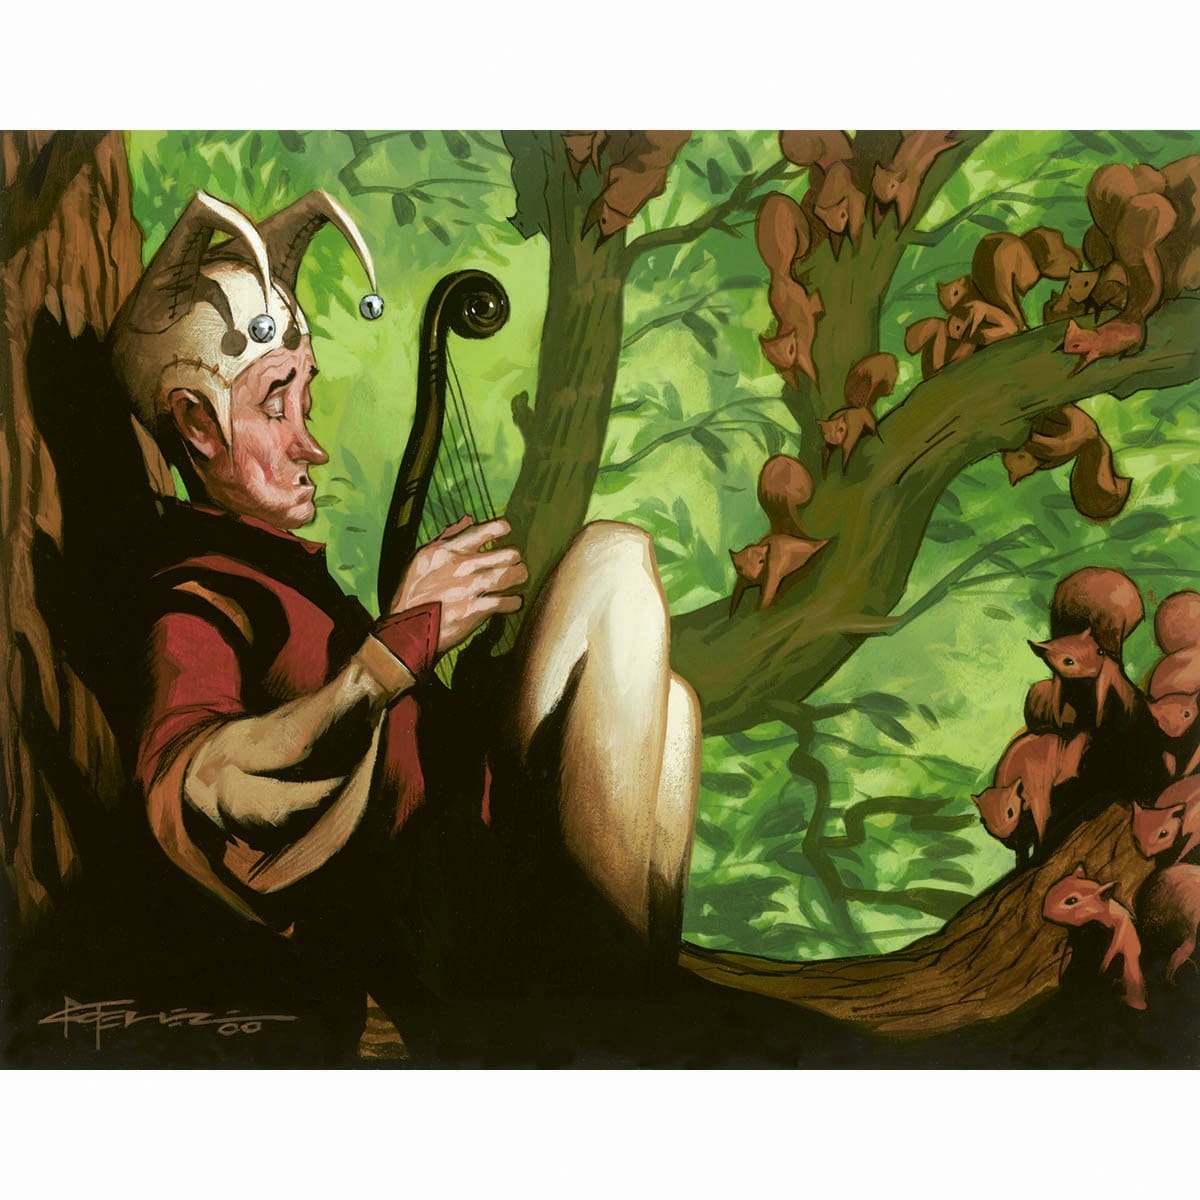 Nut Collector Print - Print - Original Magic Art - Accessories for Magic the Gathering and other card games